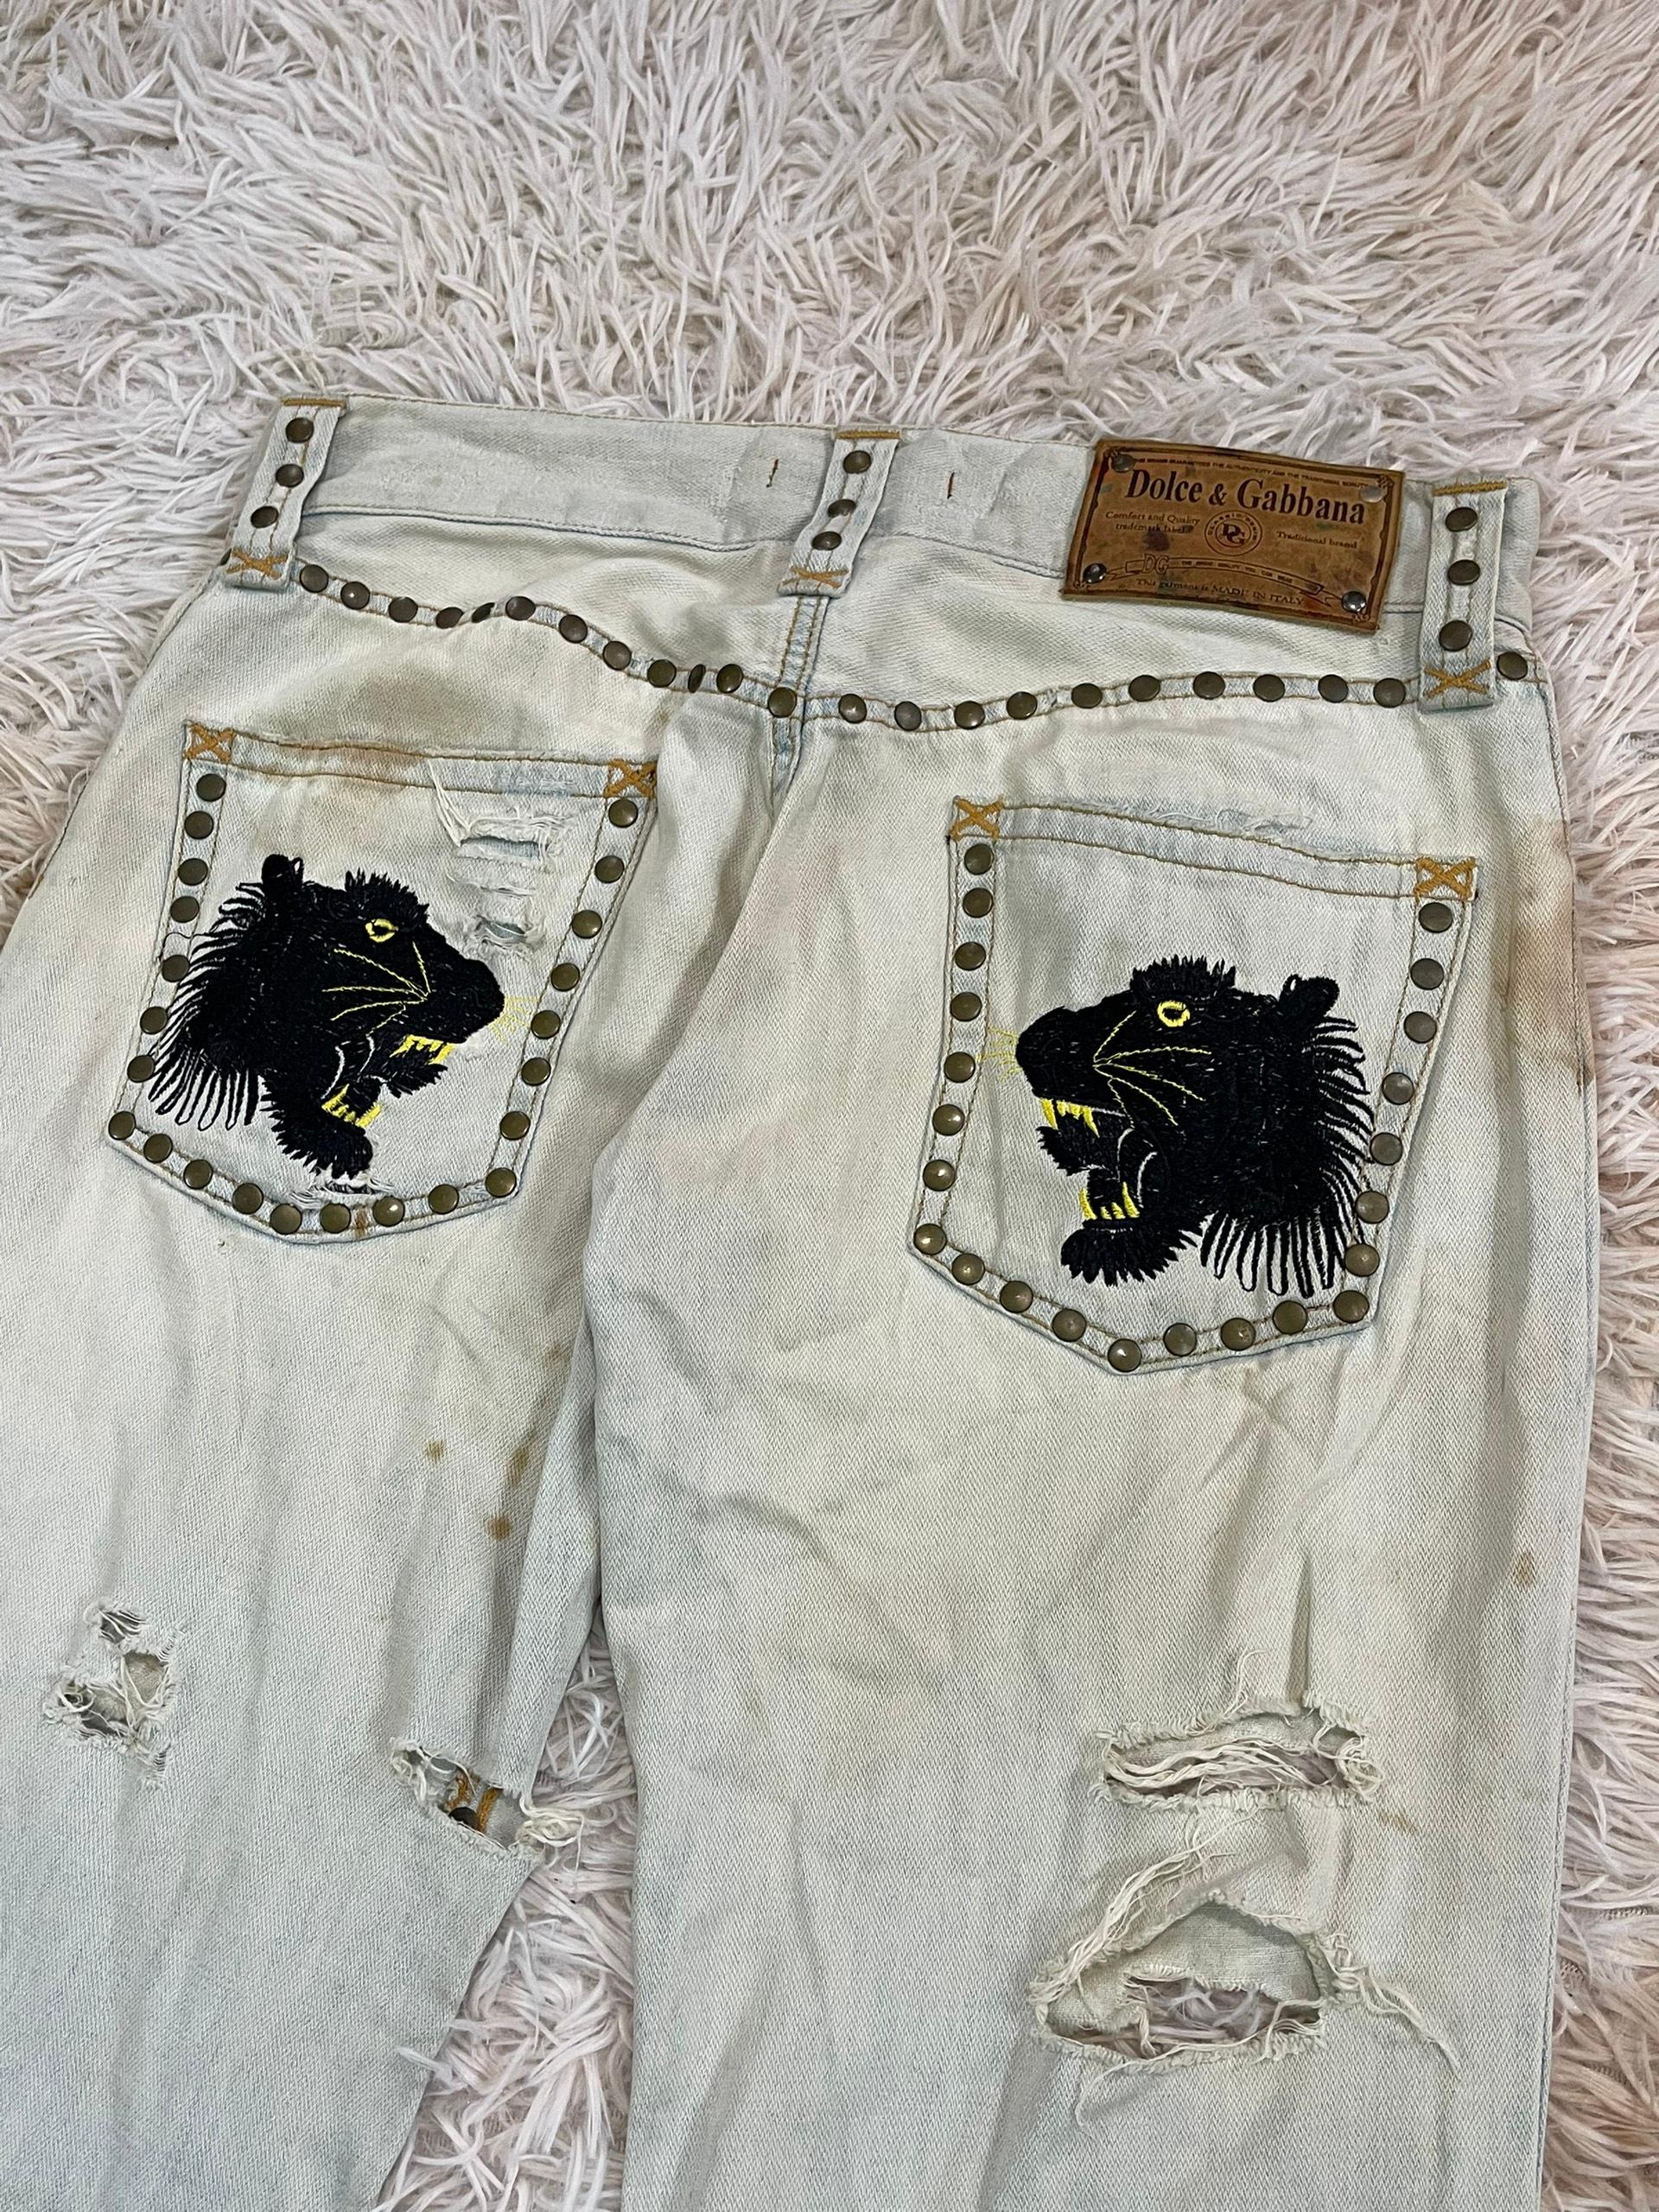 Dolce Gabbana S/S2006 Worn and Distressed Leopard Jeans 1